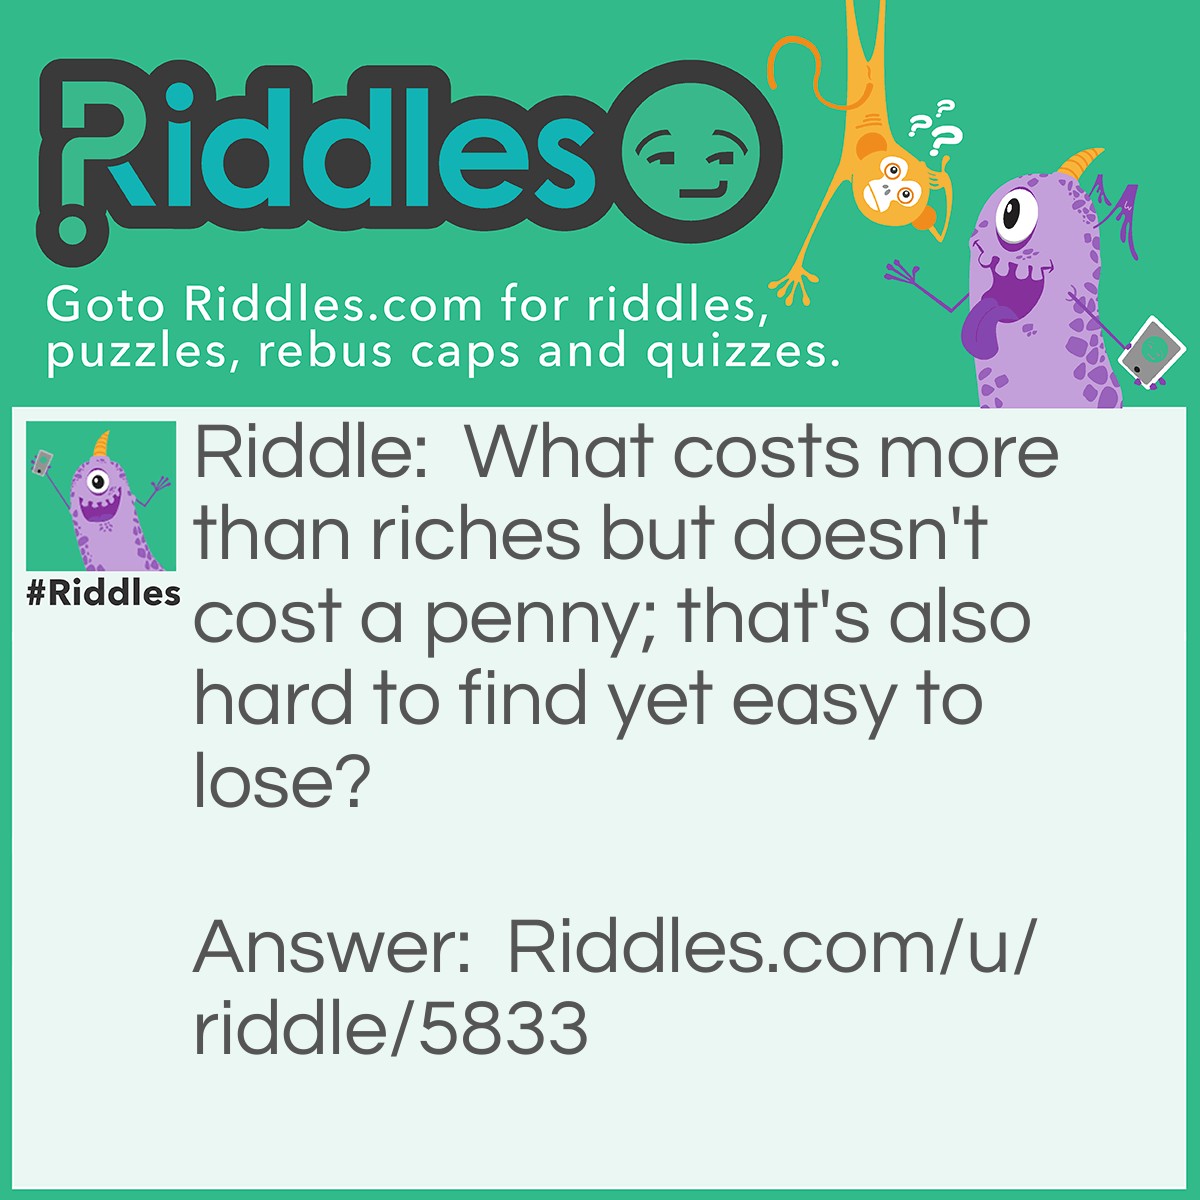 Riddle: What costs more than riches but doesn't cost a penny; that's also hard to find yet easy to lose? Answer: A friend.